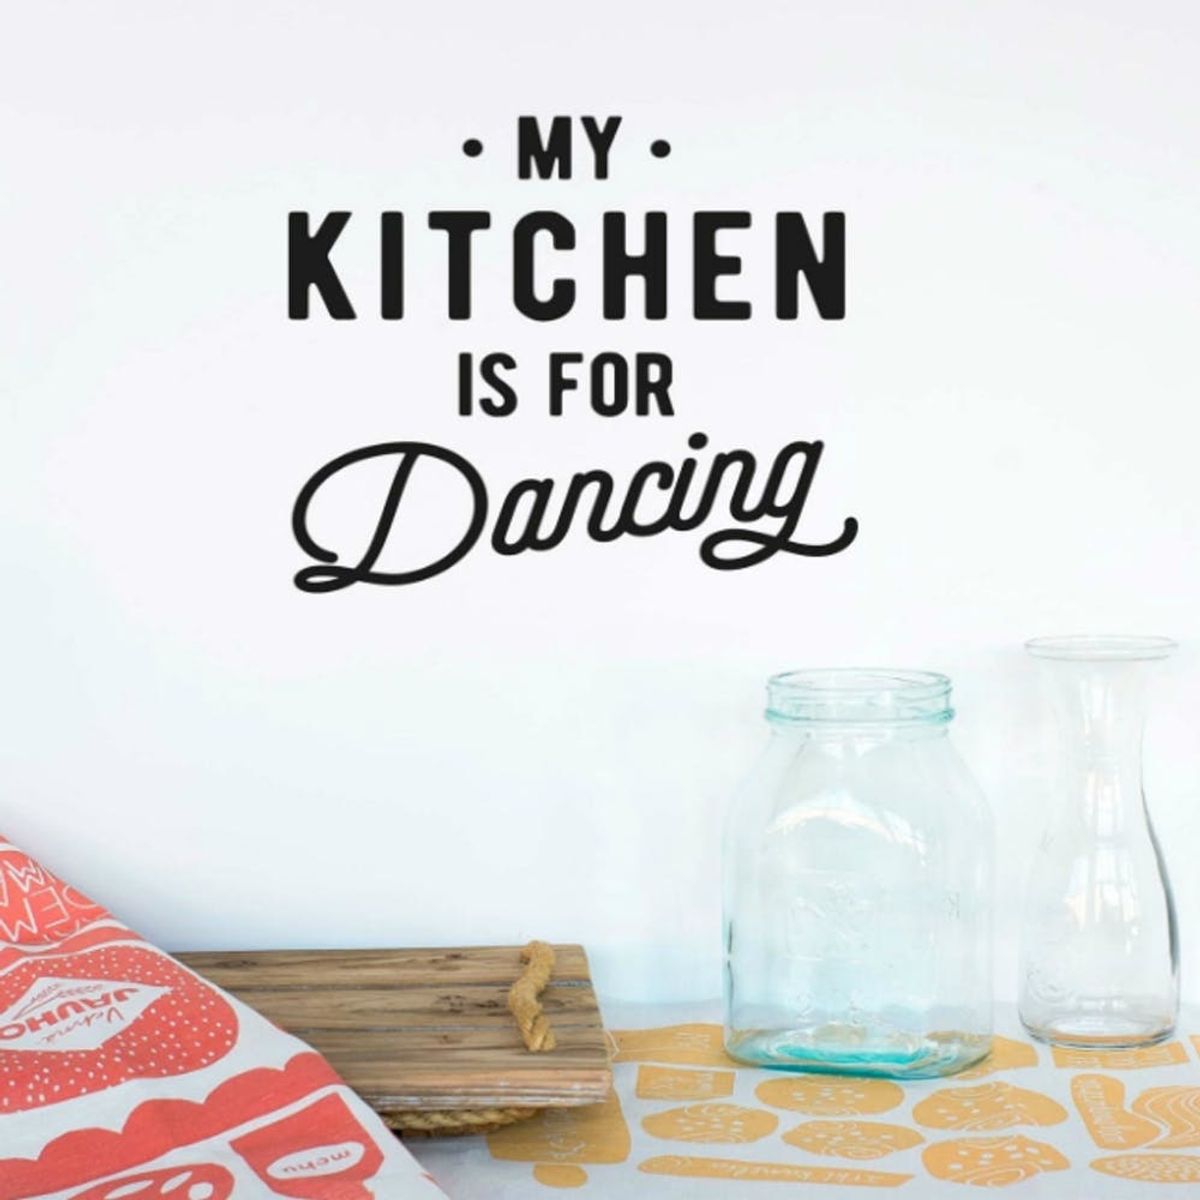 11 Ways to Personalize Your Kitchen (That Won’t P*ss Off Your Landlord)